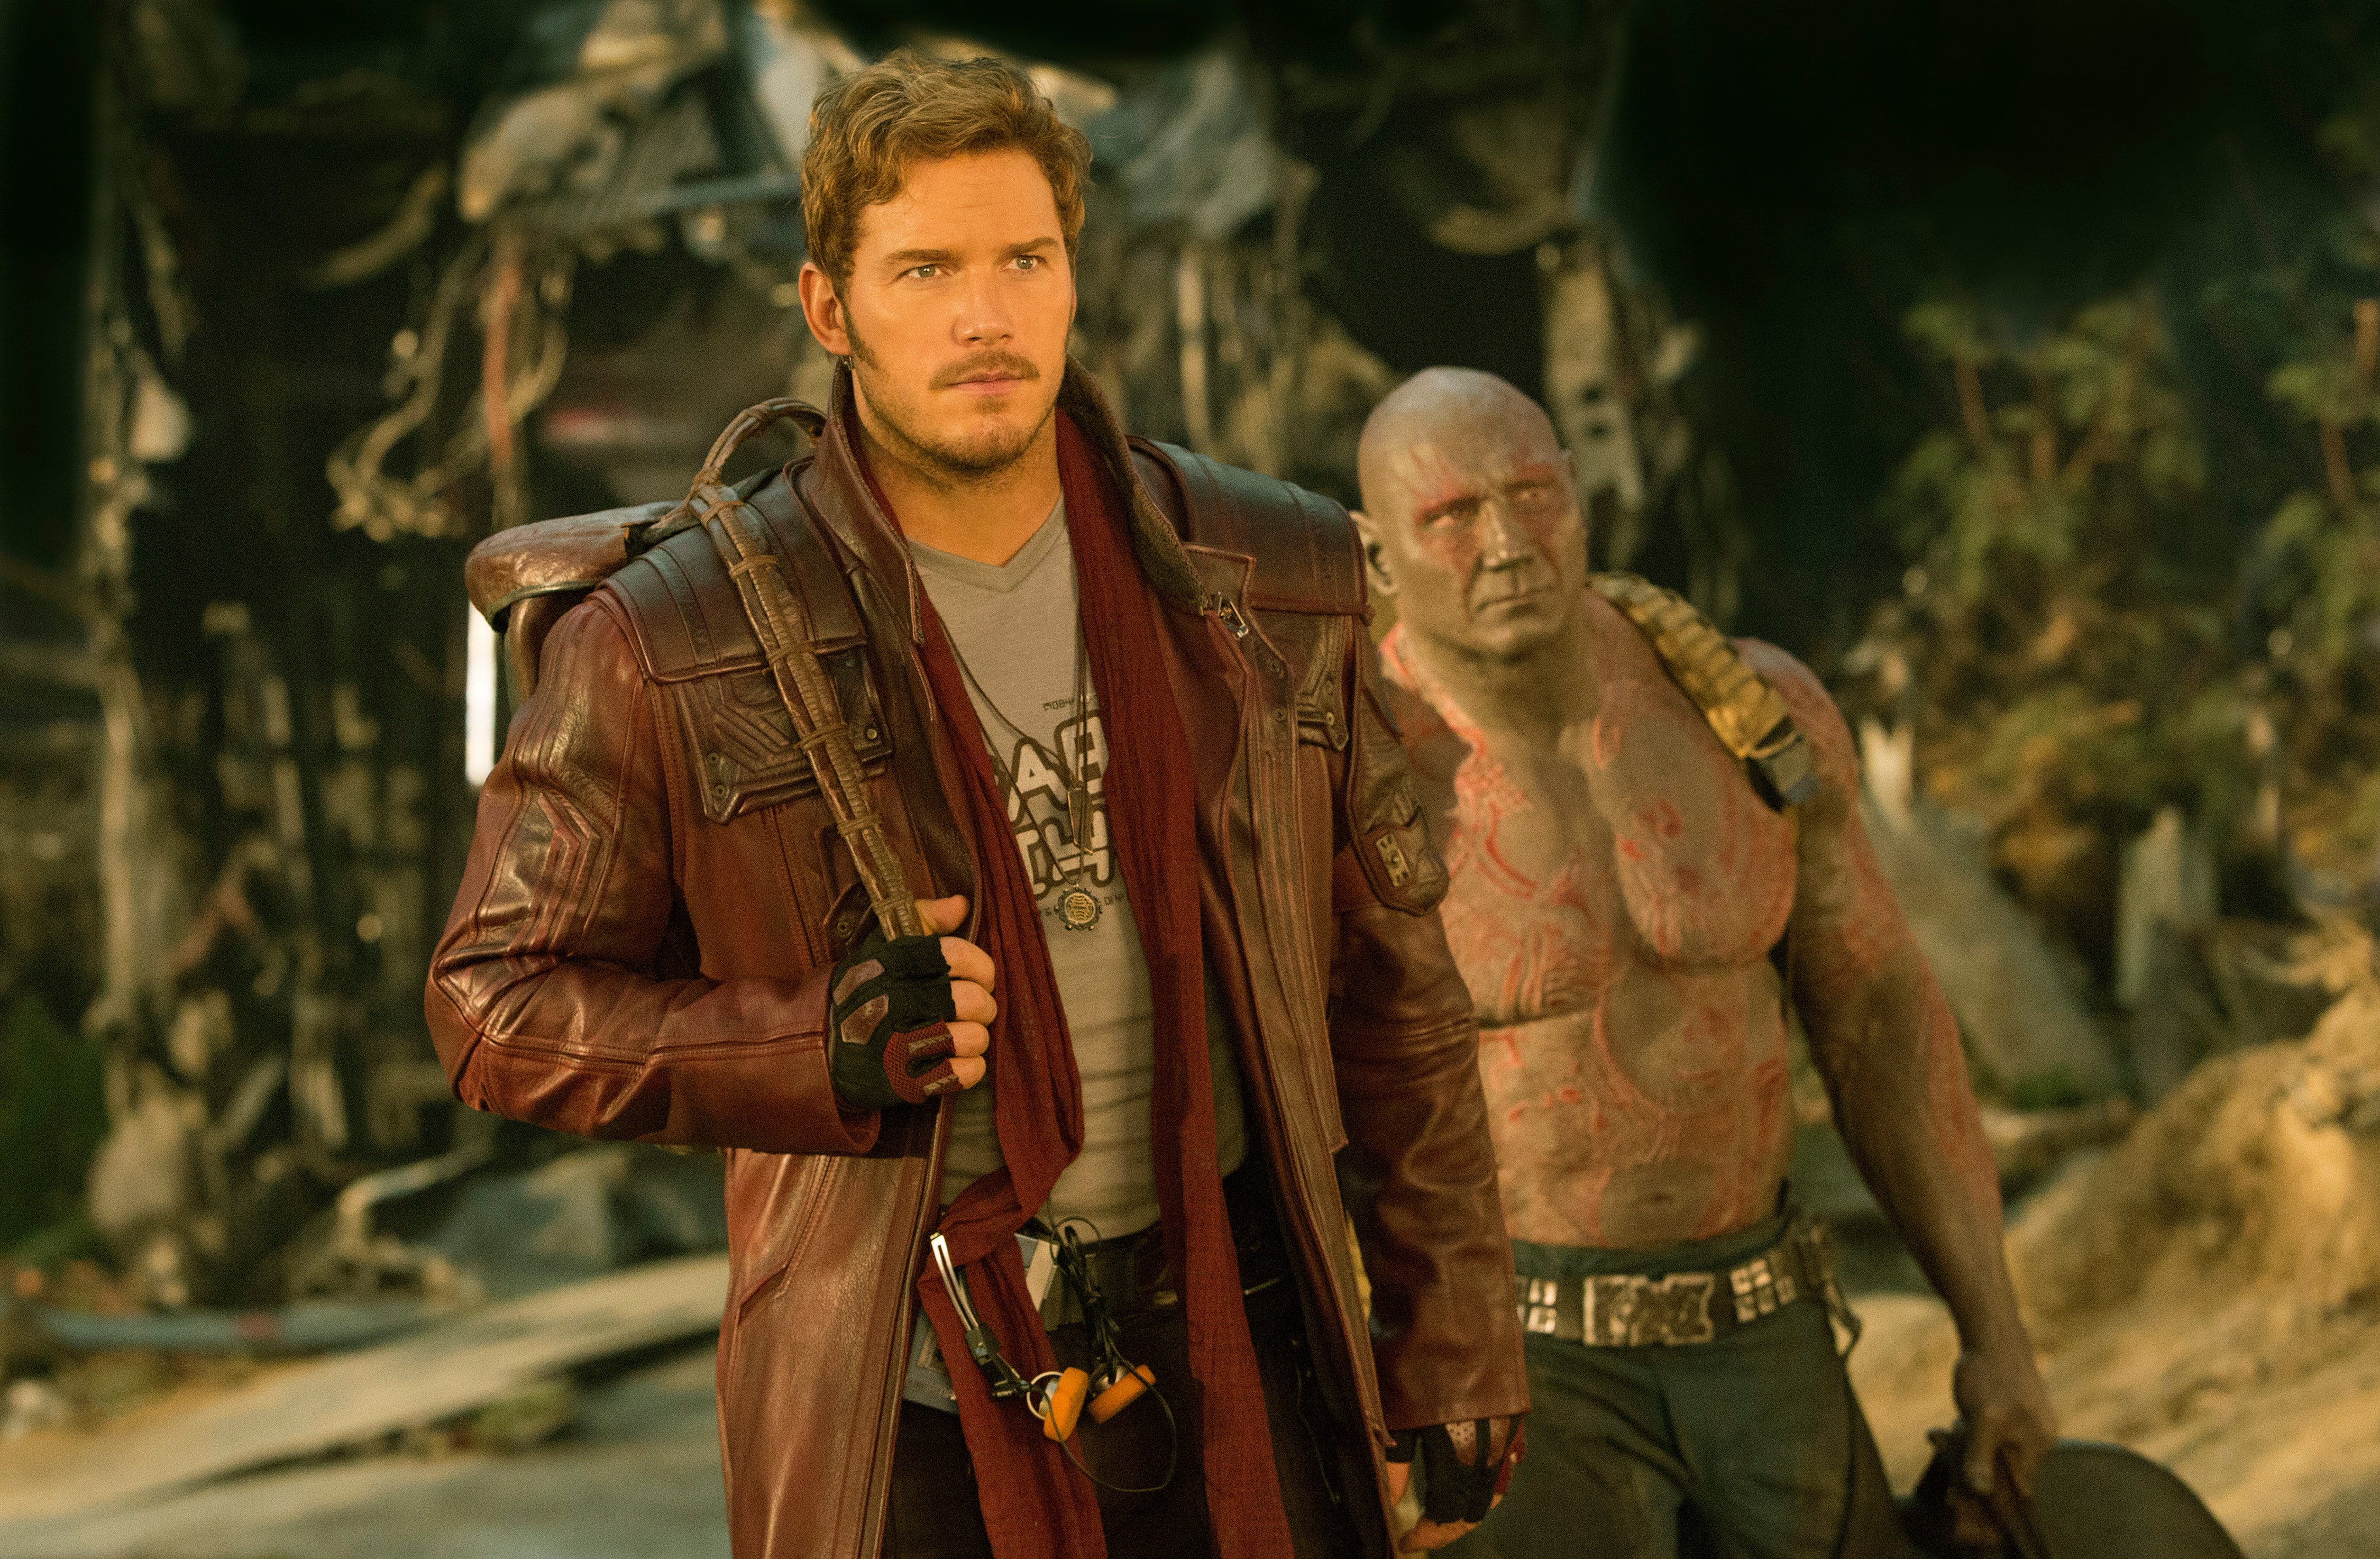 Guardians of the Galaxy Vol 2 movie image